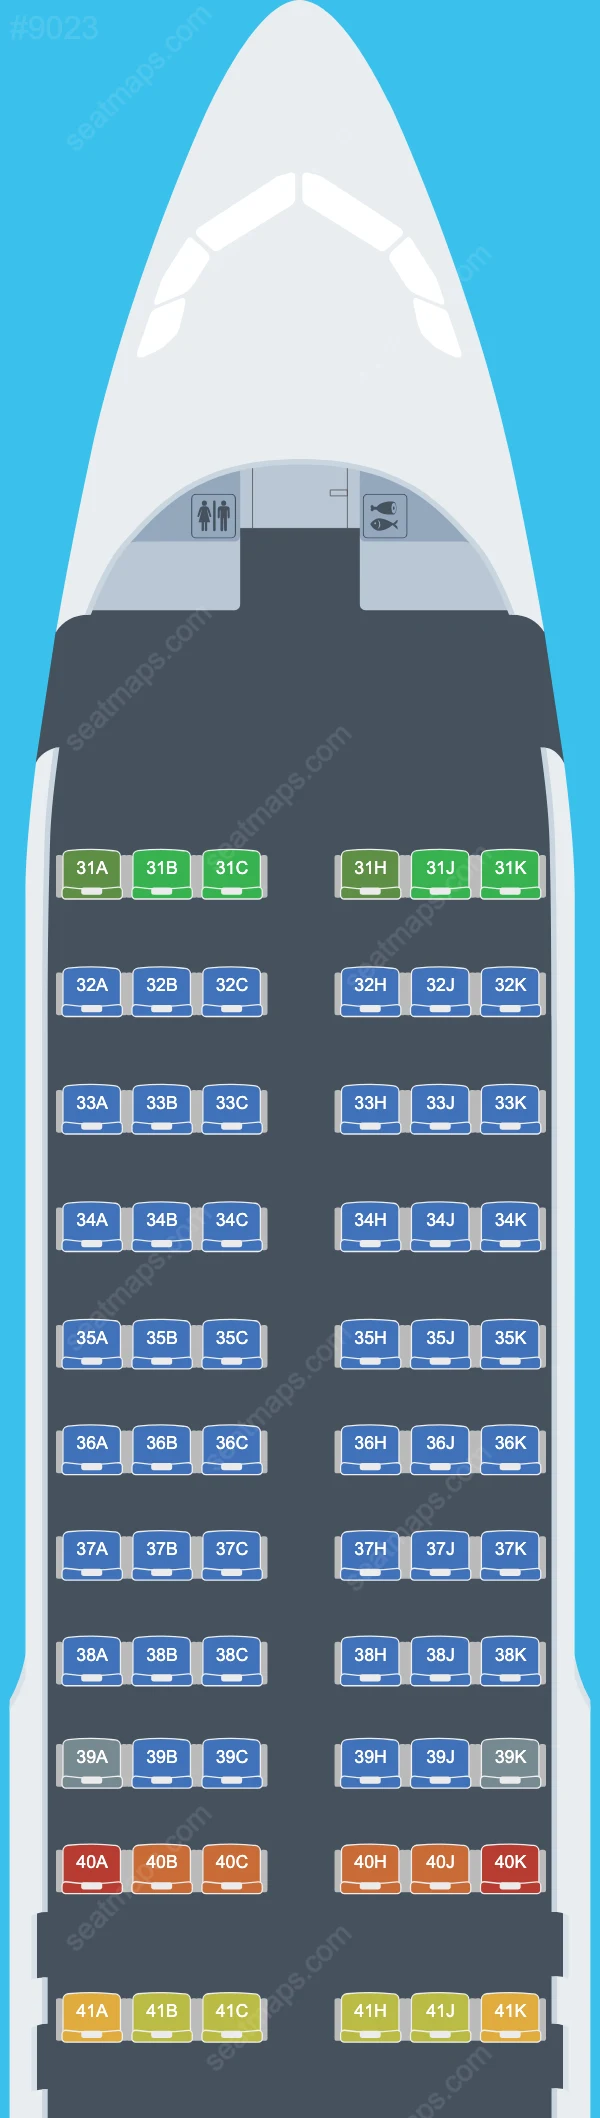 China Southern Airbus A320 Seat Maps A320-200 V.6